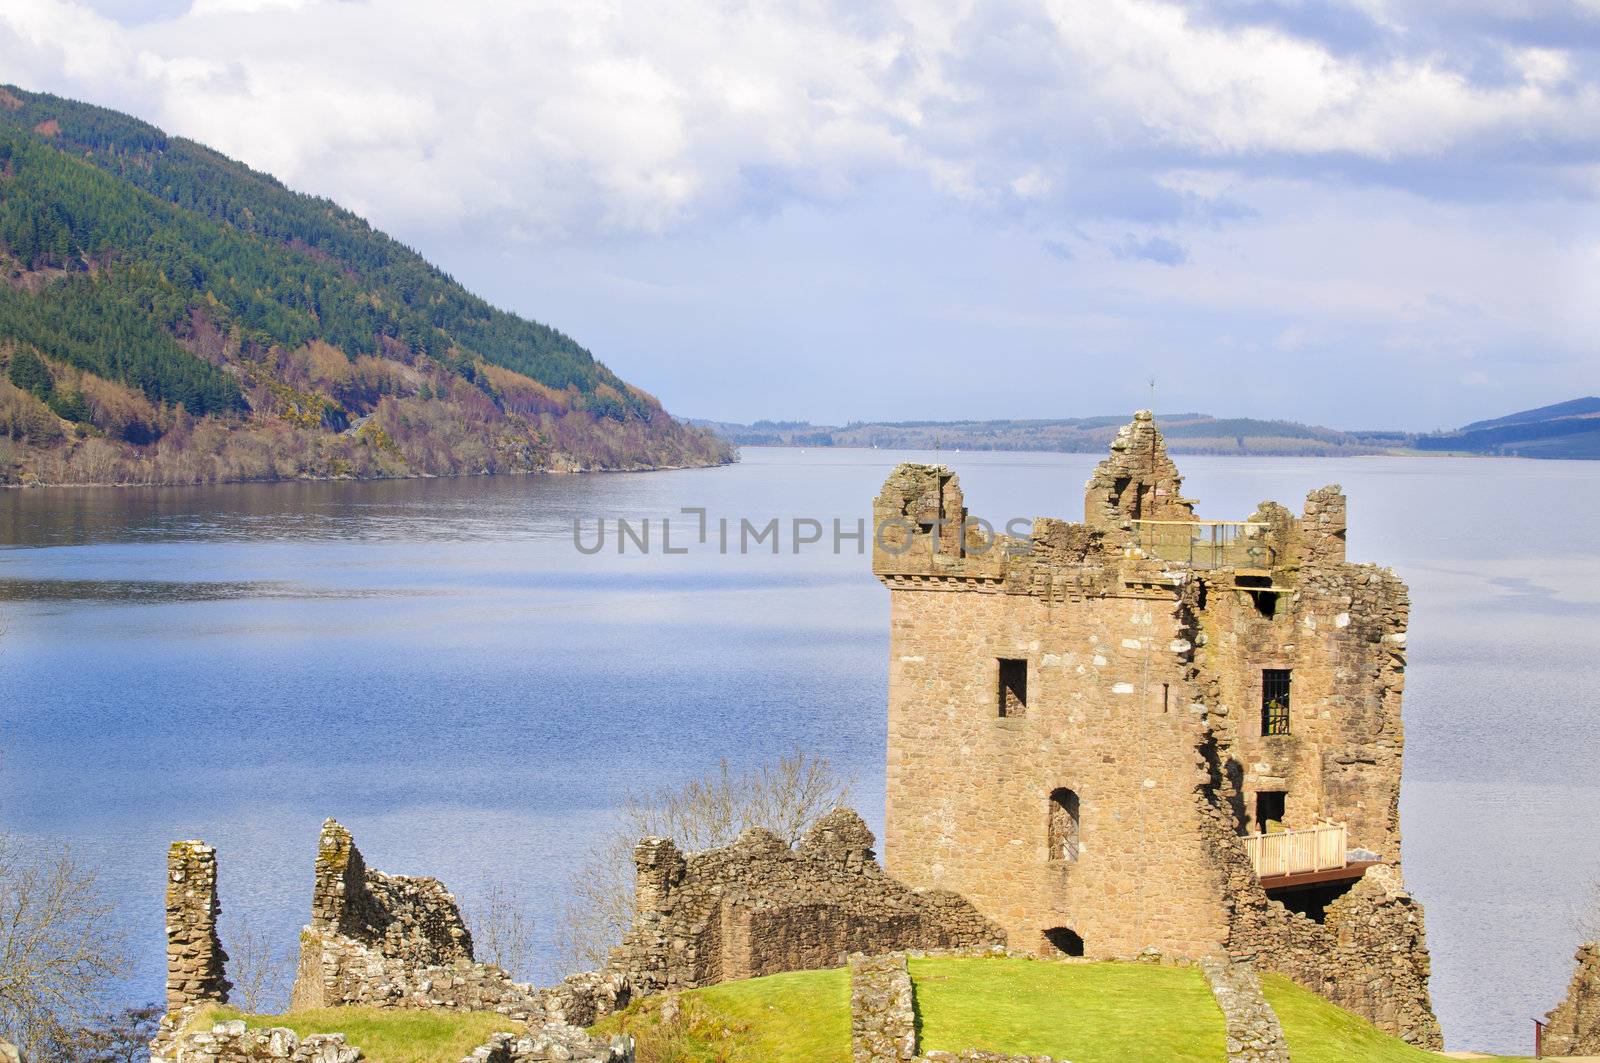 Urquhart Castle on Loch Ness in Scotland the home of the clan Grant, and the place of the most sightings of "Nessy" the famous Loch Ness monster